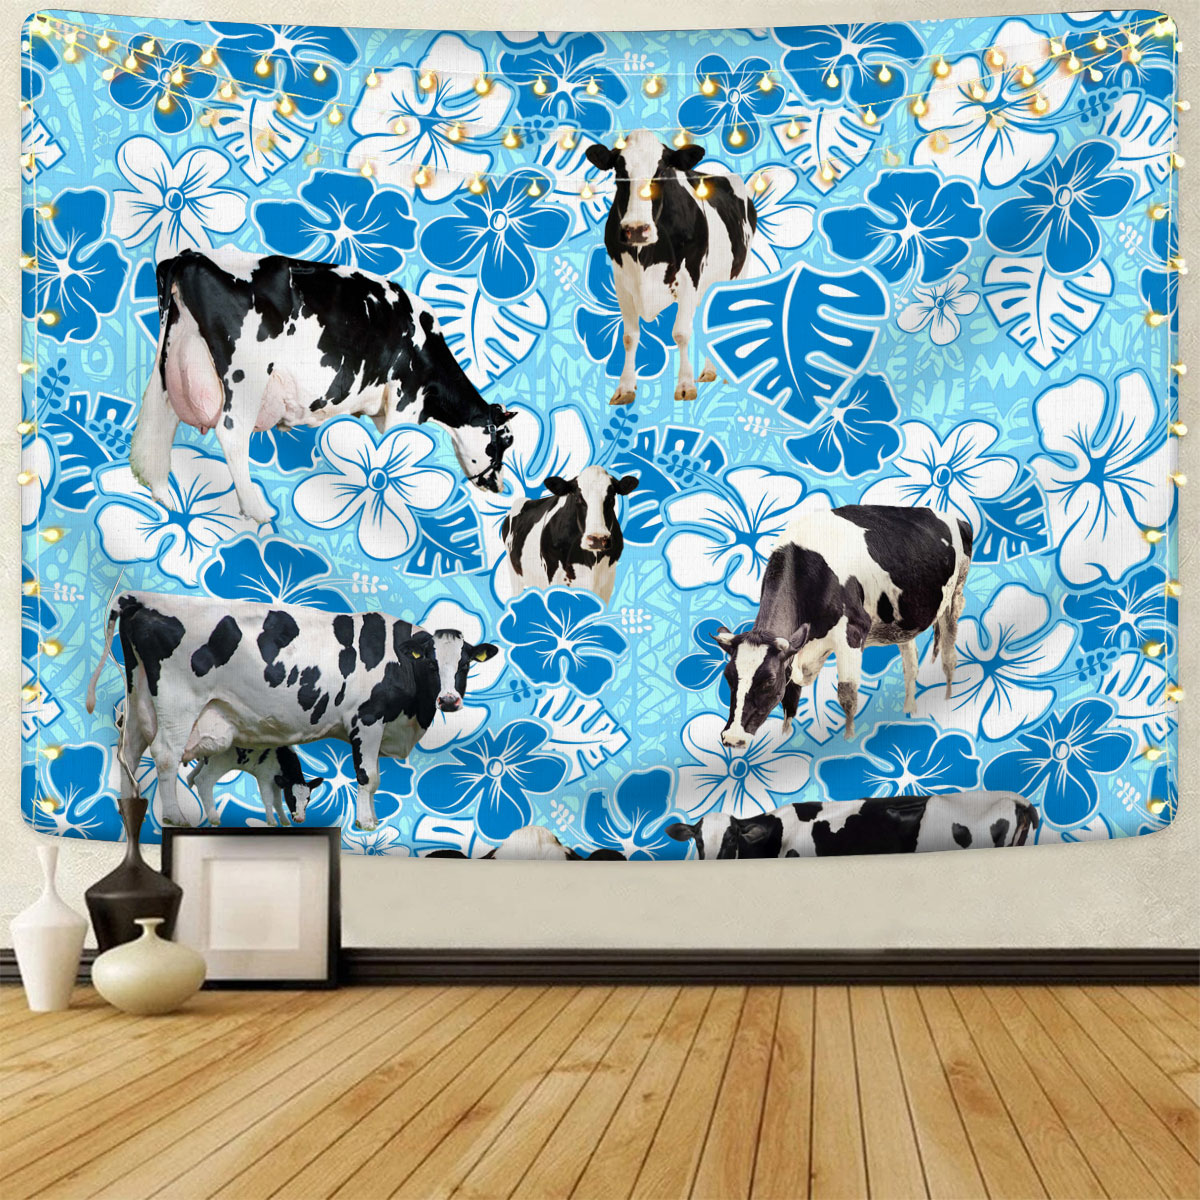 Hostein Blue Floral Tapestry